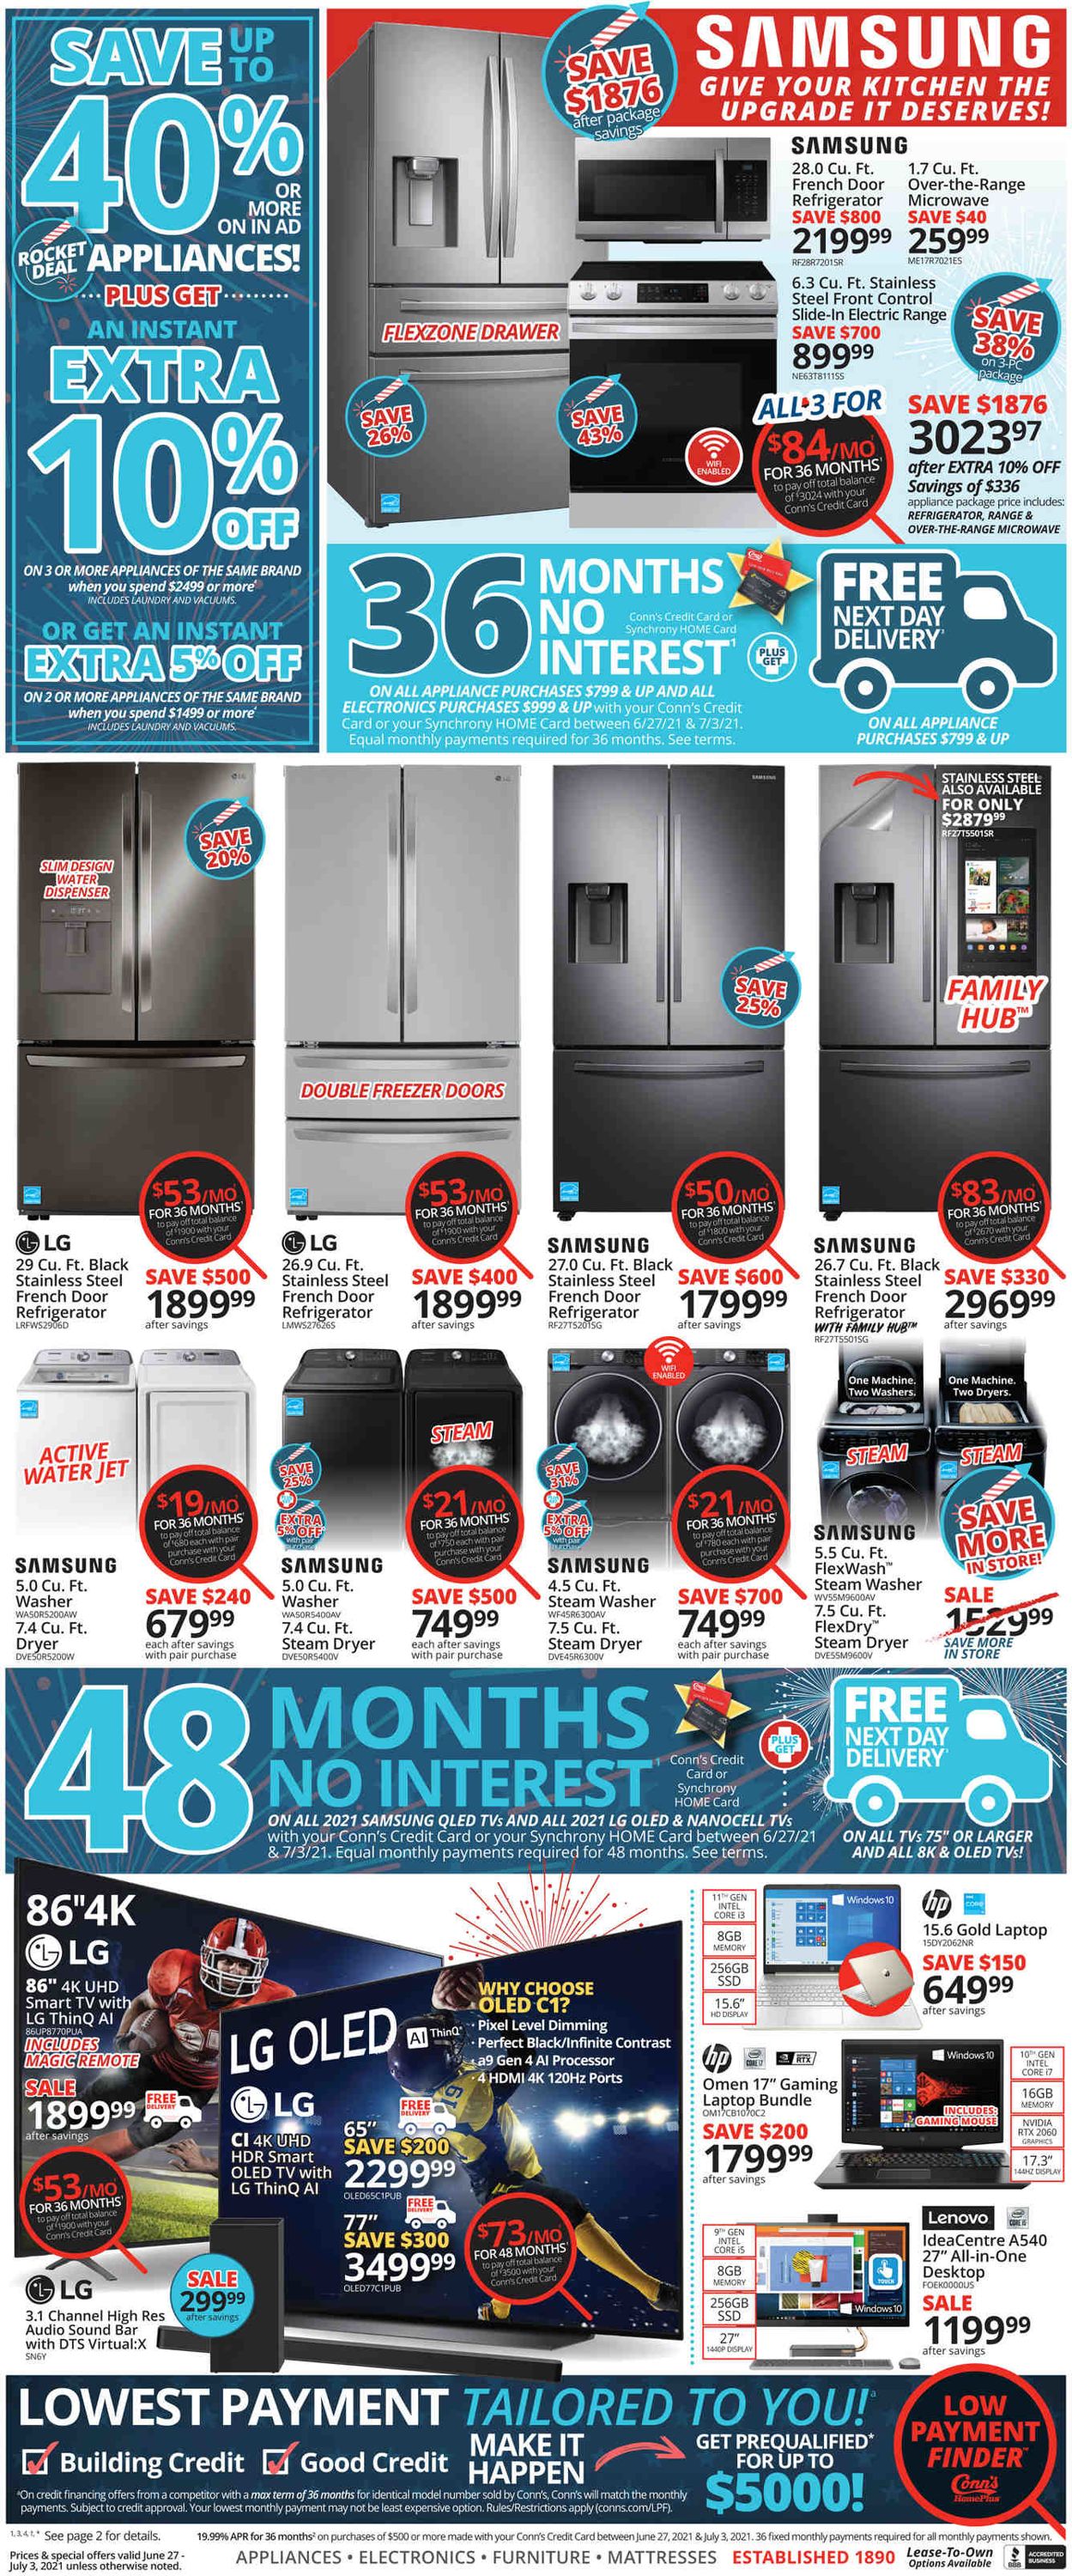 Conn's Home Plus Weekly Ad Circular - valid 06/27-07/03/2021 (Page 4)